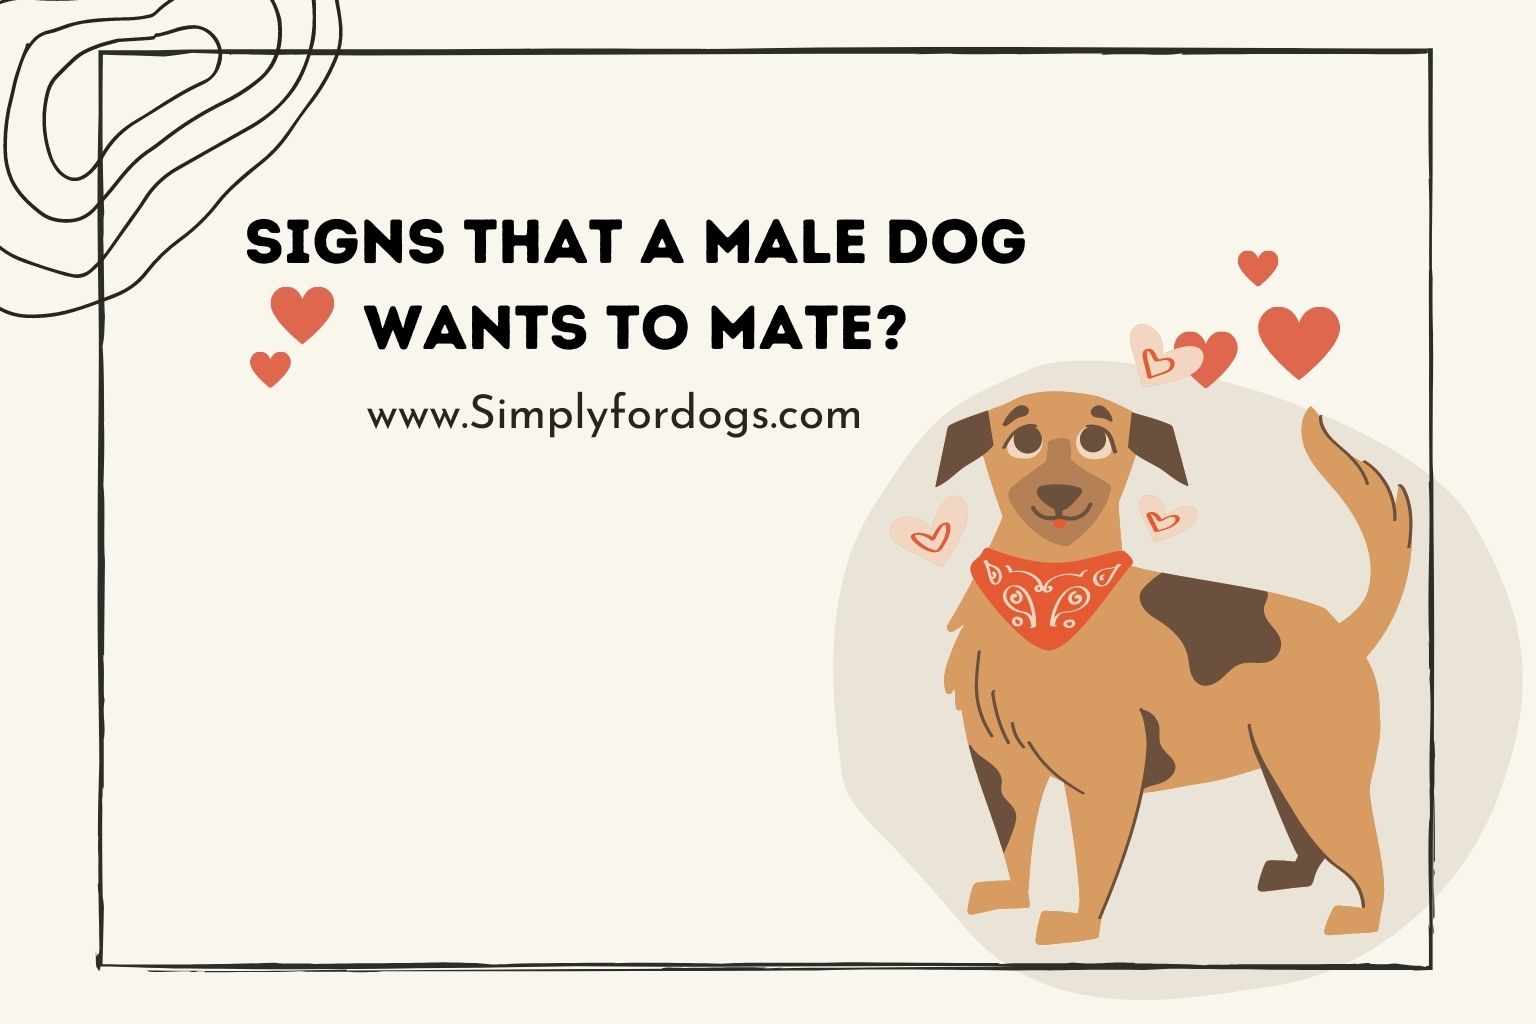 Signs-That-a-Male-Dog-Wants-to-Mate